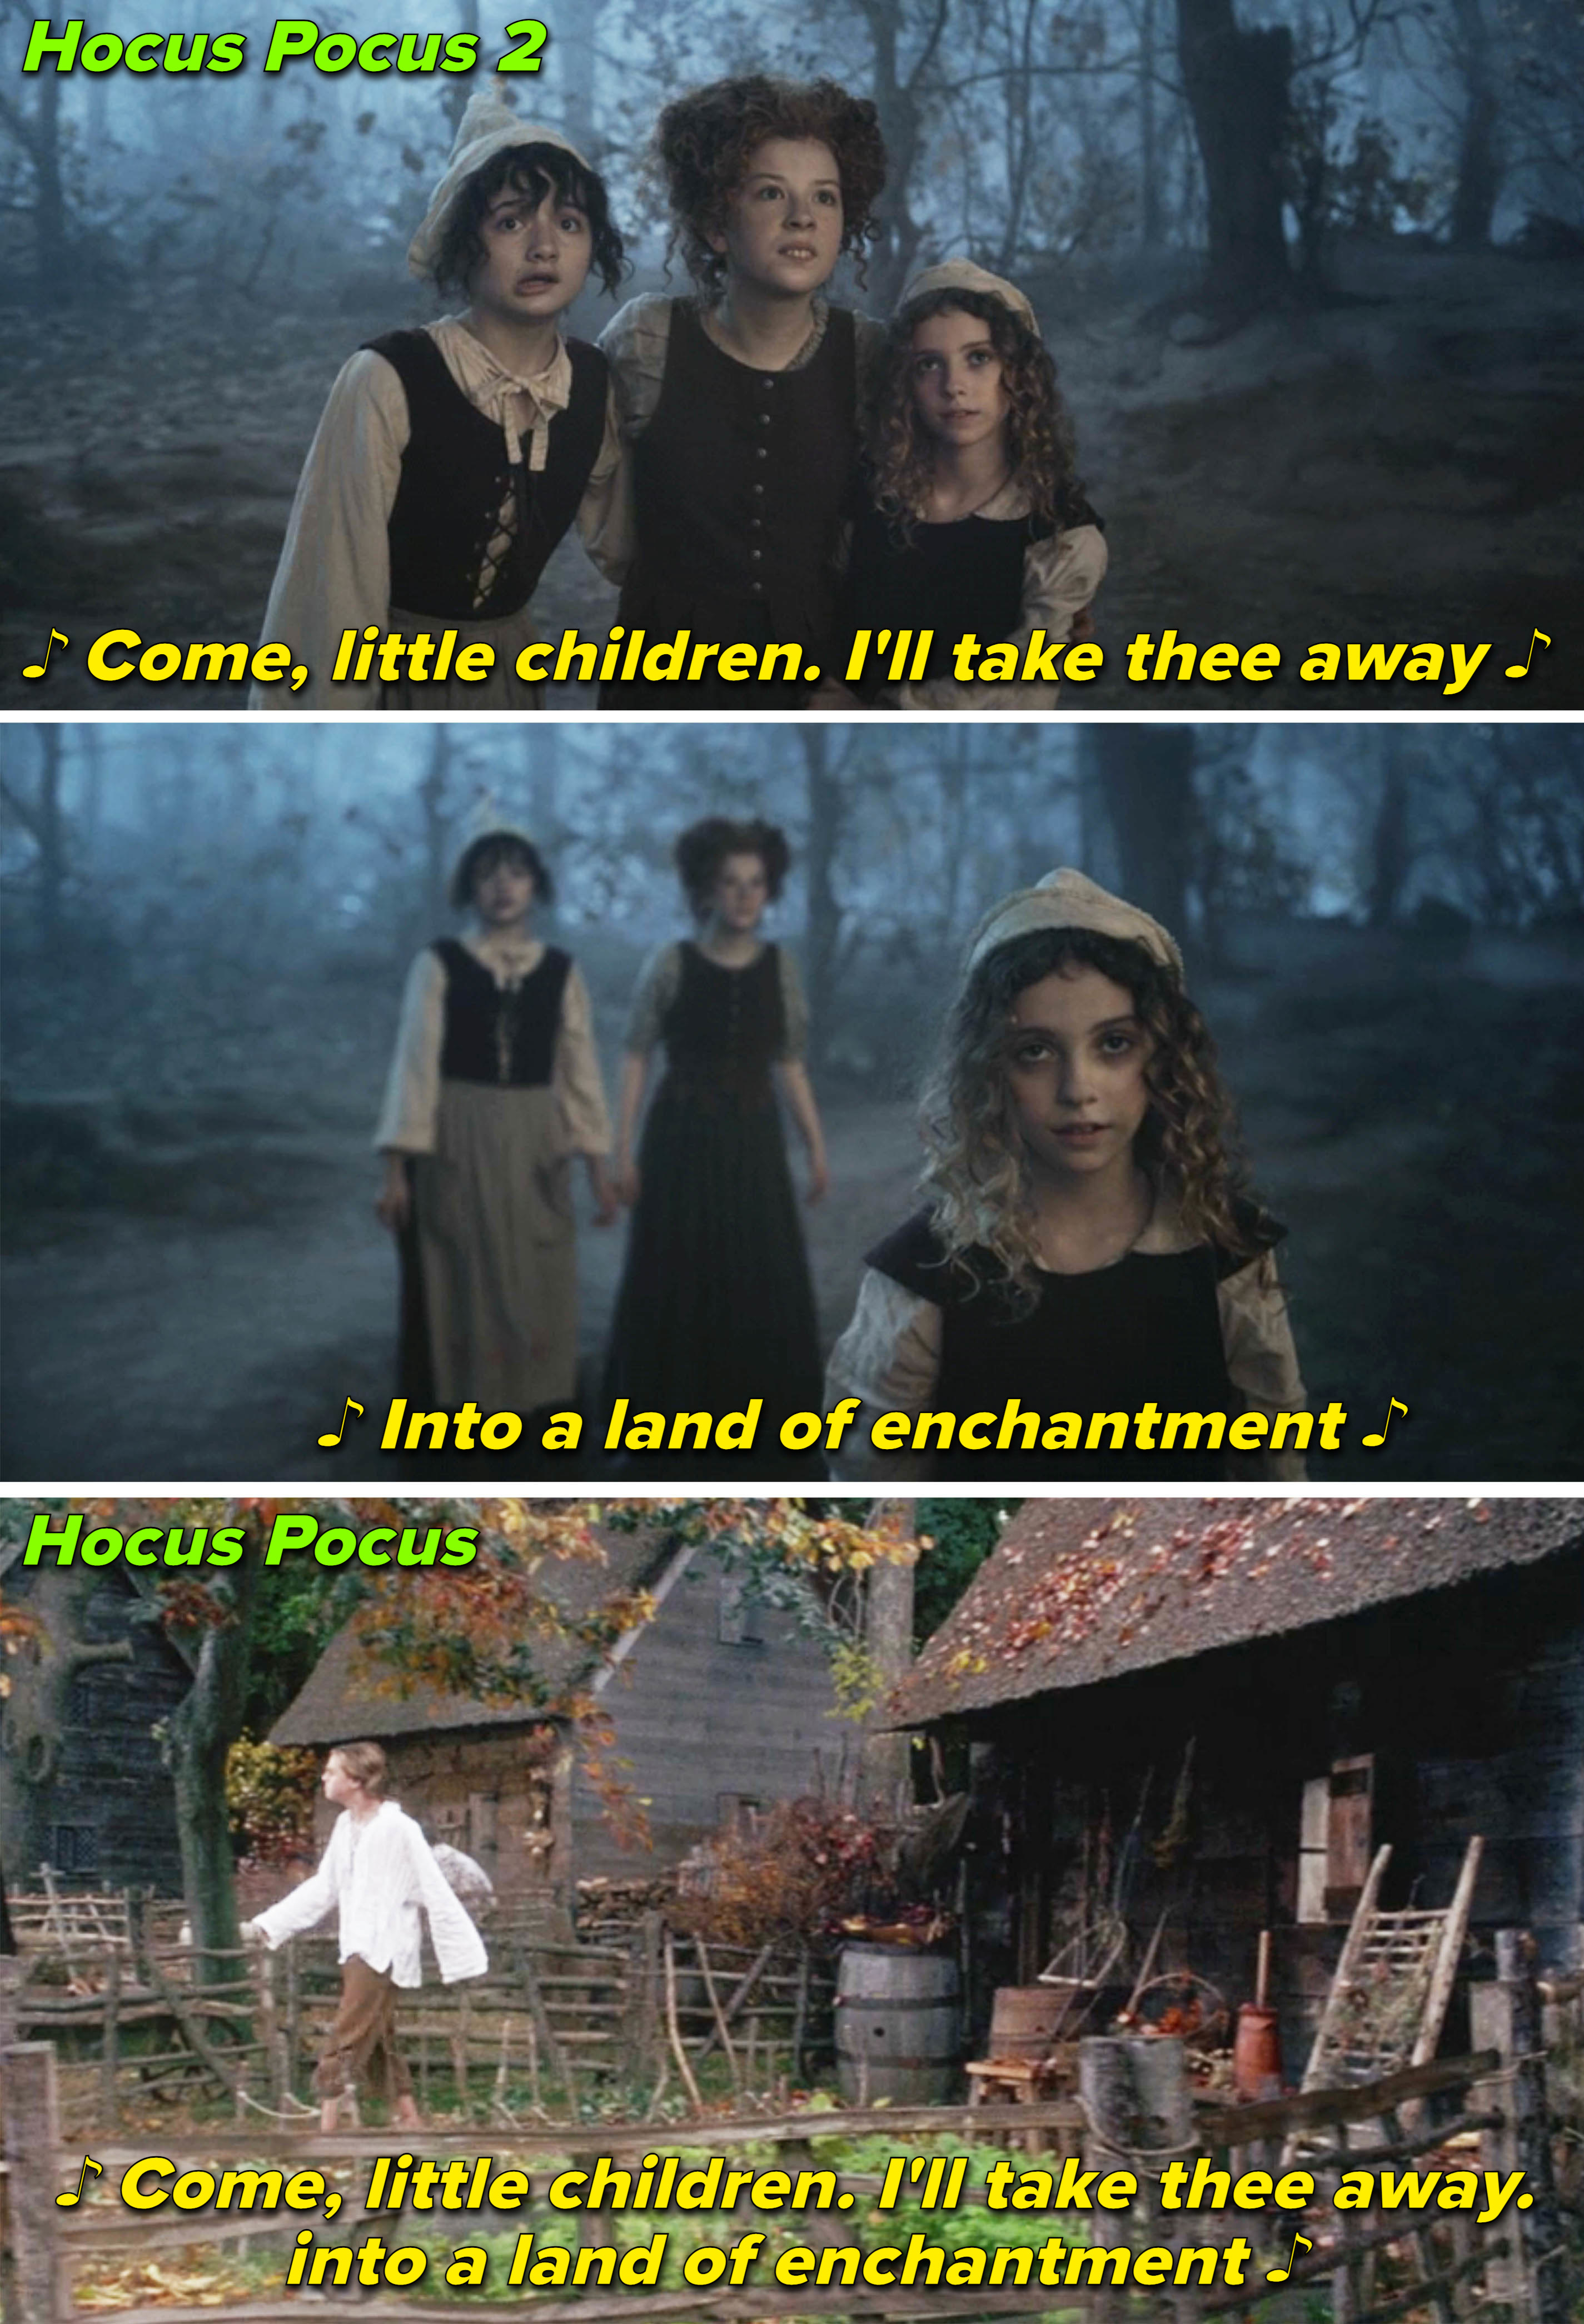 The line &quot;Come, little children, I&#x27;ll take thee away into a land of enchantment&quot; sung in each film